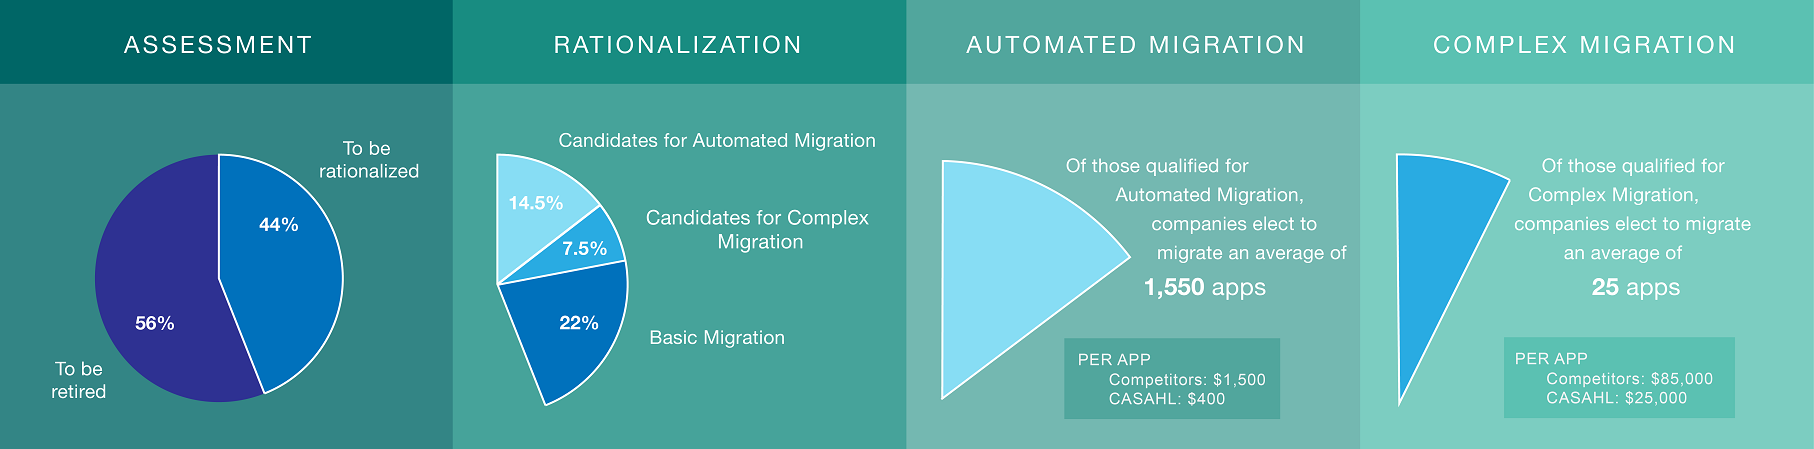 SharePoint assessment and migration patterns & stats